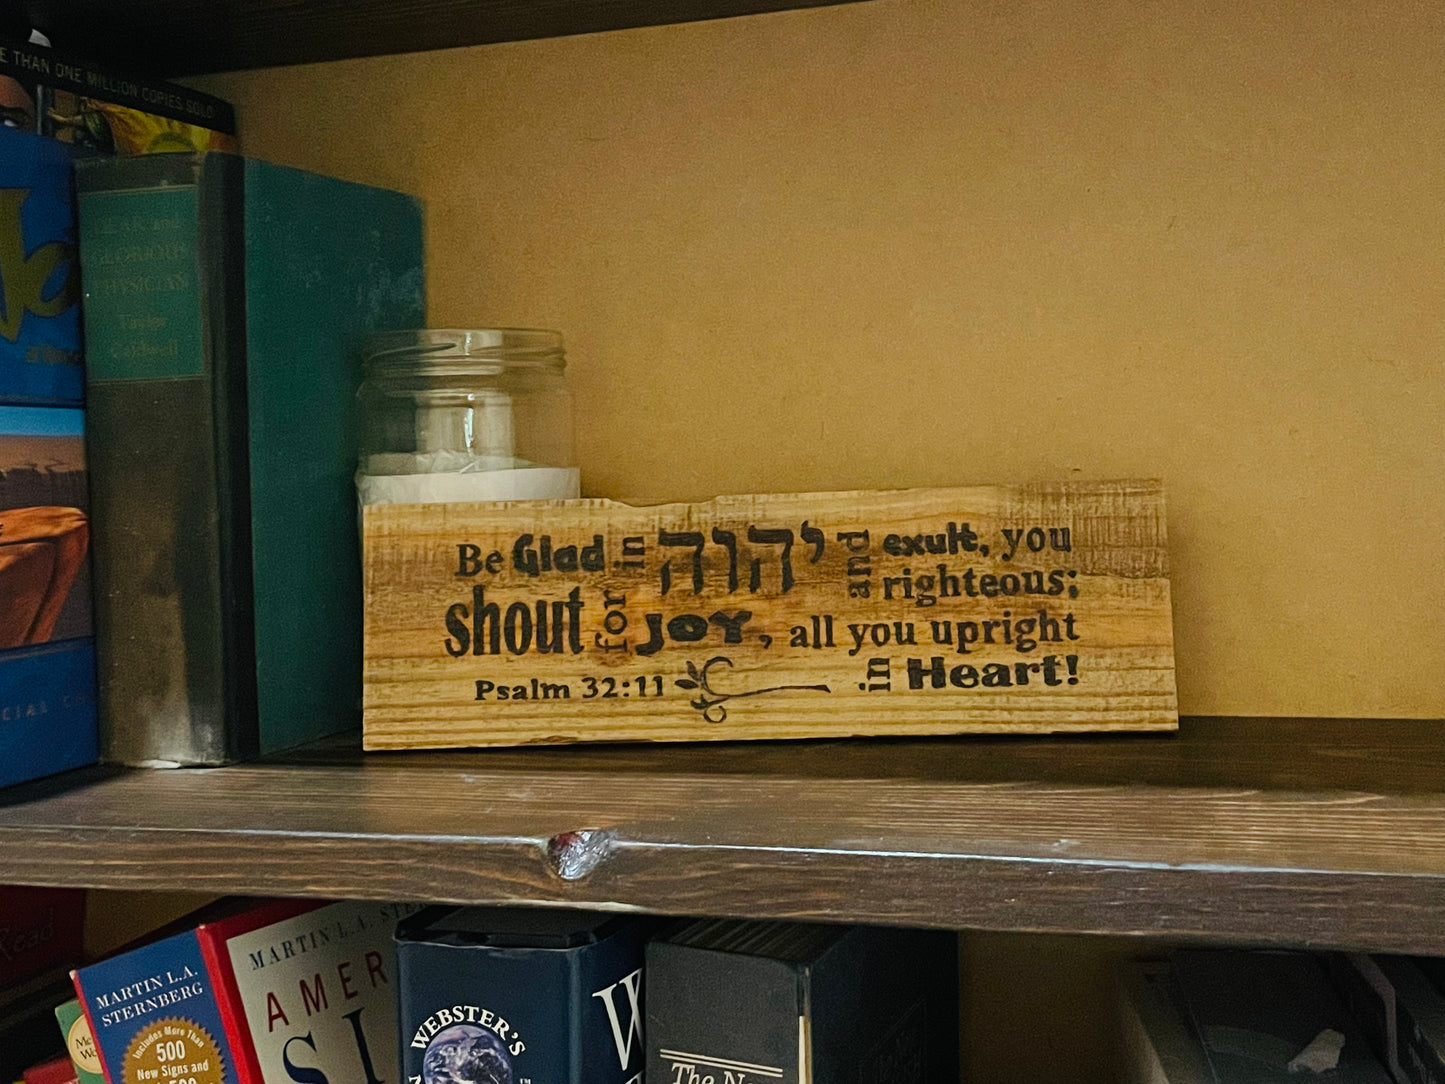 Psalm 32:11, "Be glad in יהוה..." Wood burned Scripture